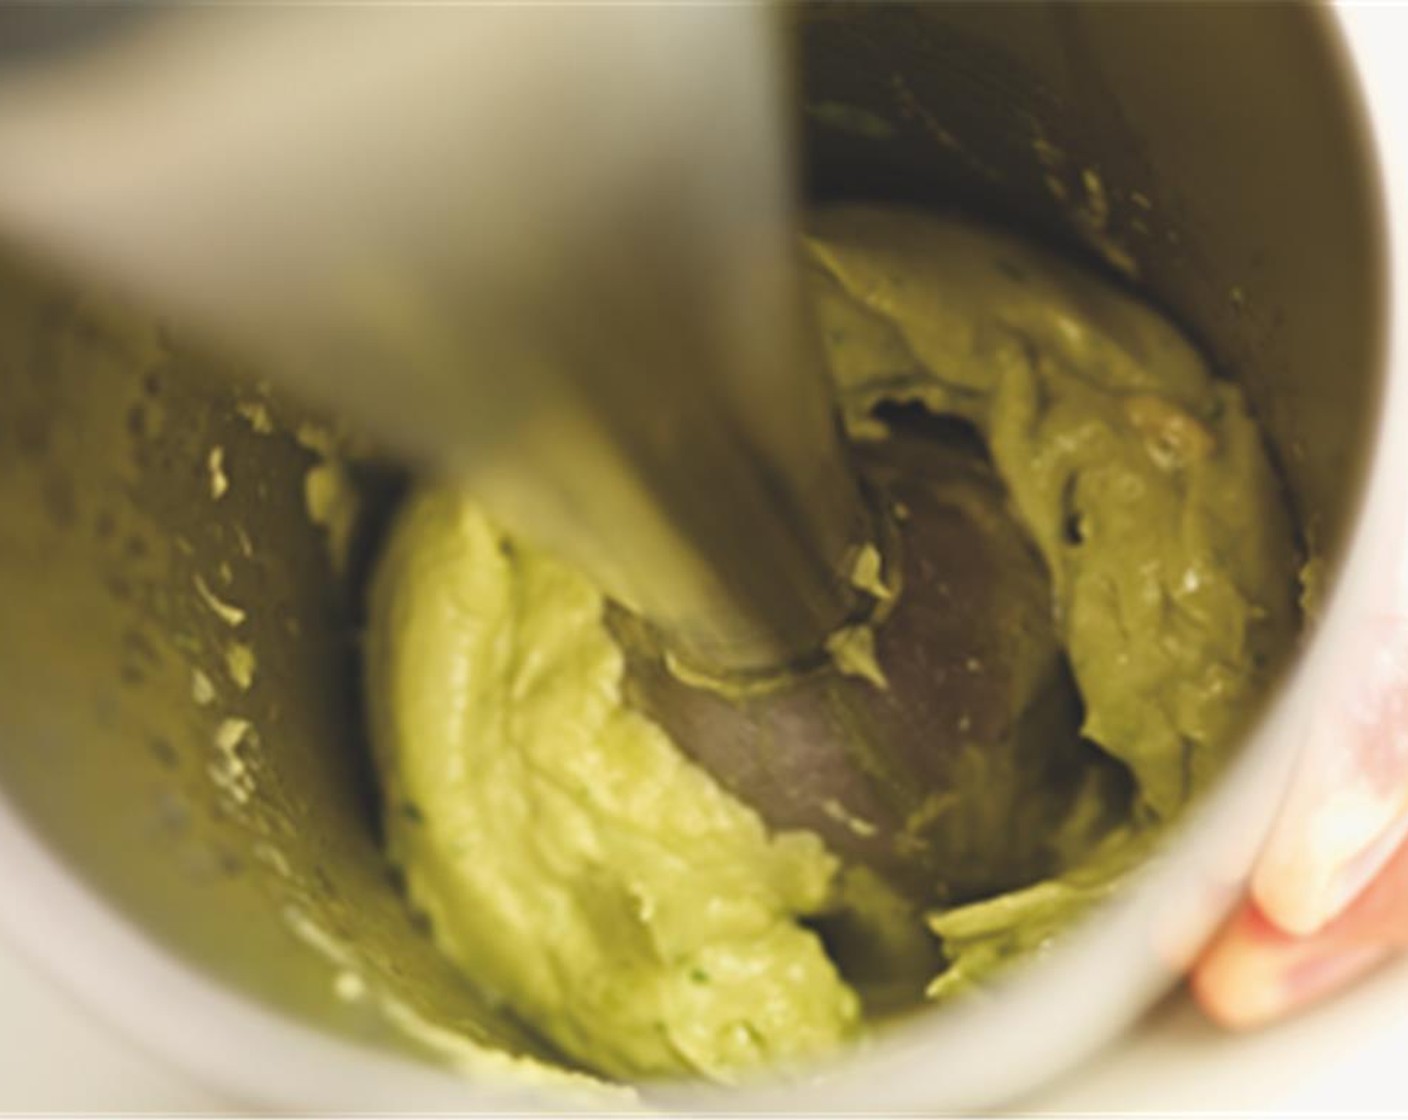 step 2 Combine the avocado with the lime juice, garlic, Olive Oil (2 Tbsp), Tabasco® Original Red Pepper Sauce (1 tsp), chopped Fresh Chives (1 Tbsp) and Sea Salt (1/2 tsp). Blend until you have a light
green puree.